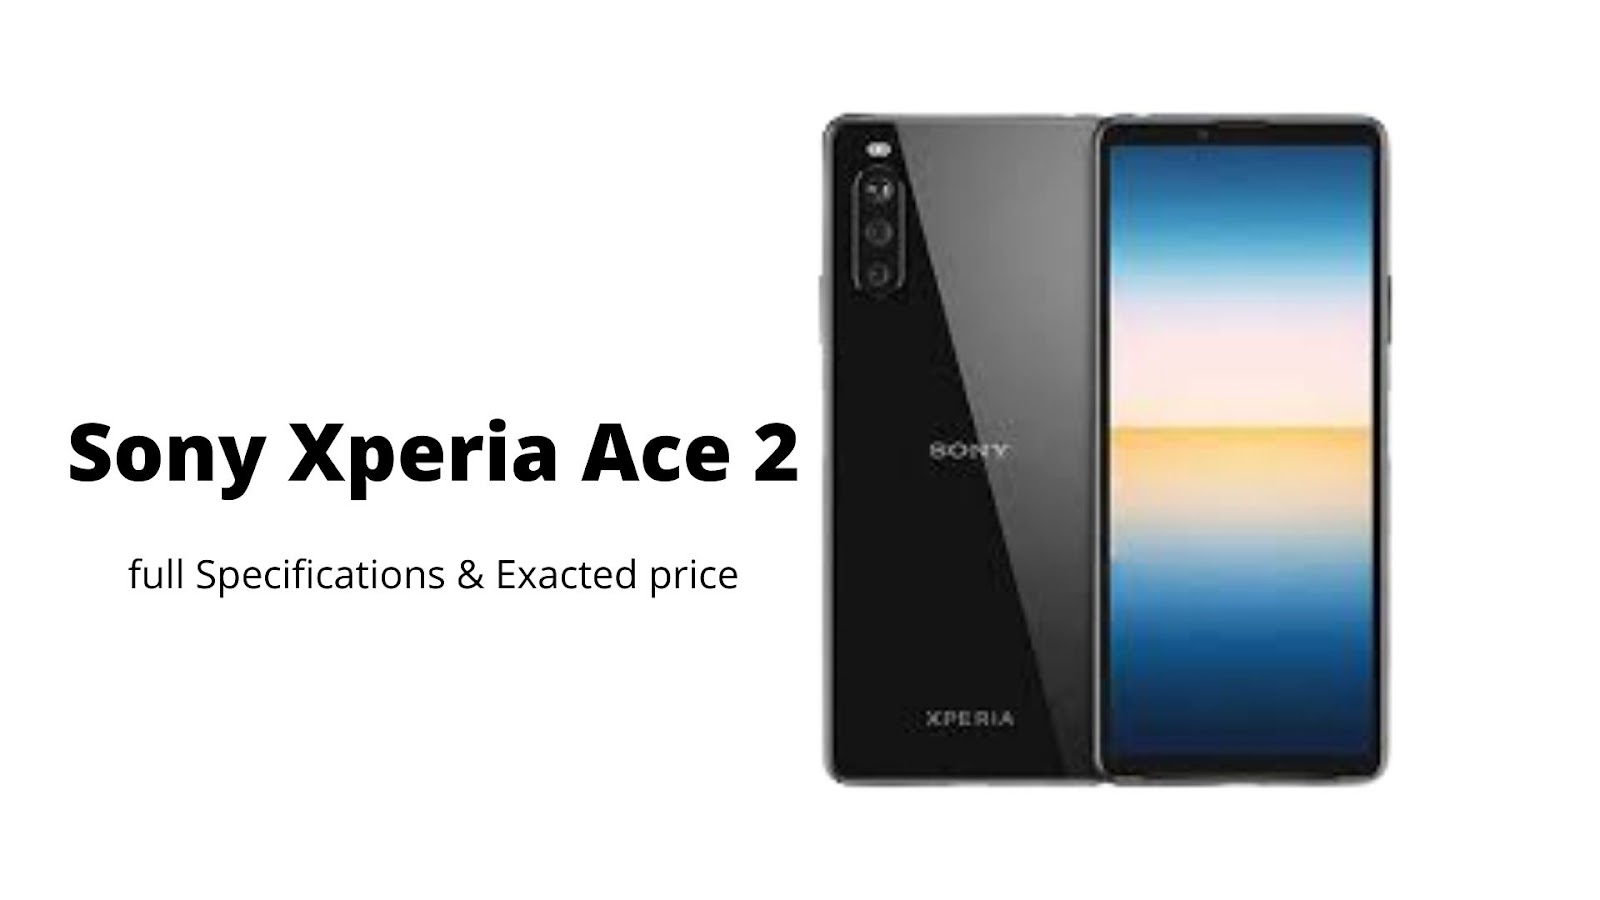 Sony Xperia Ace 2 full Specifications & Exacted price 